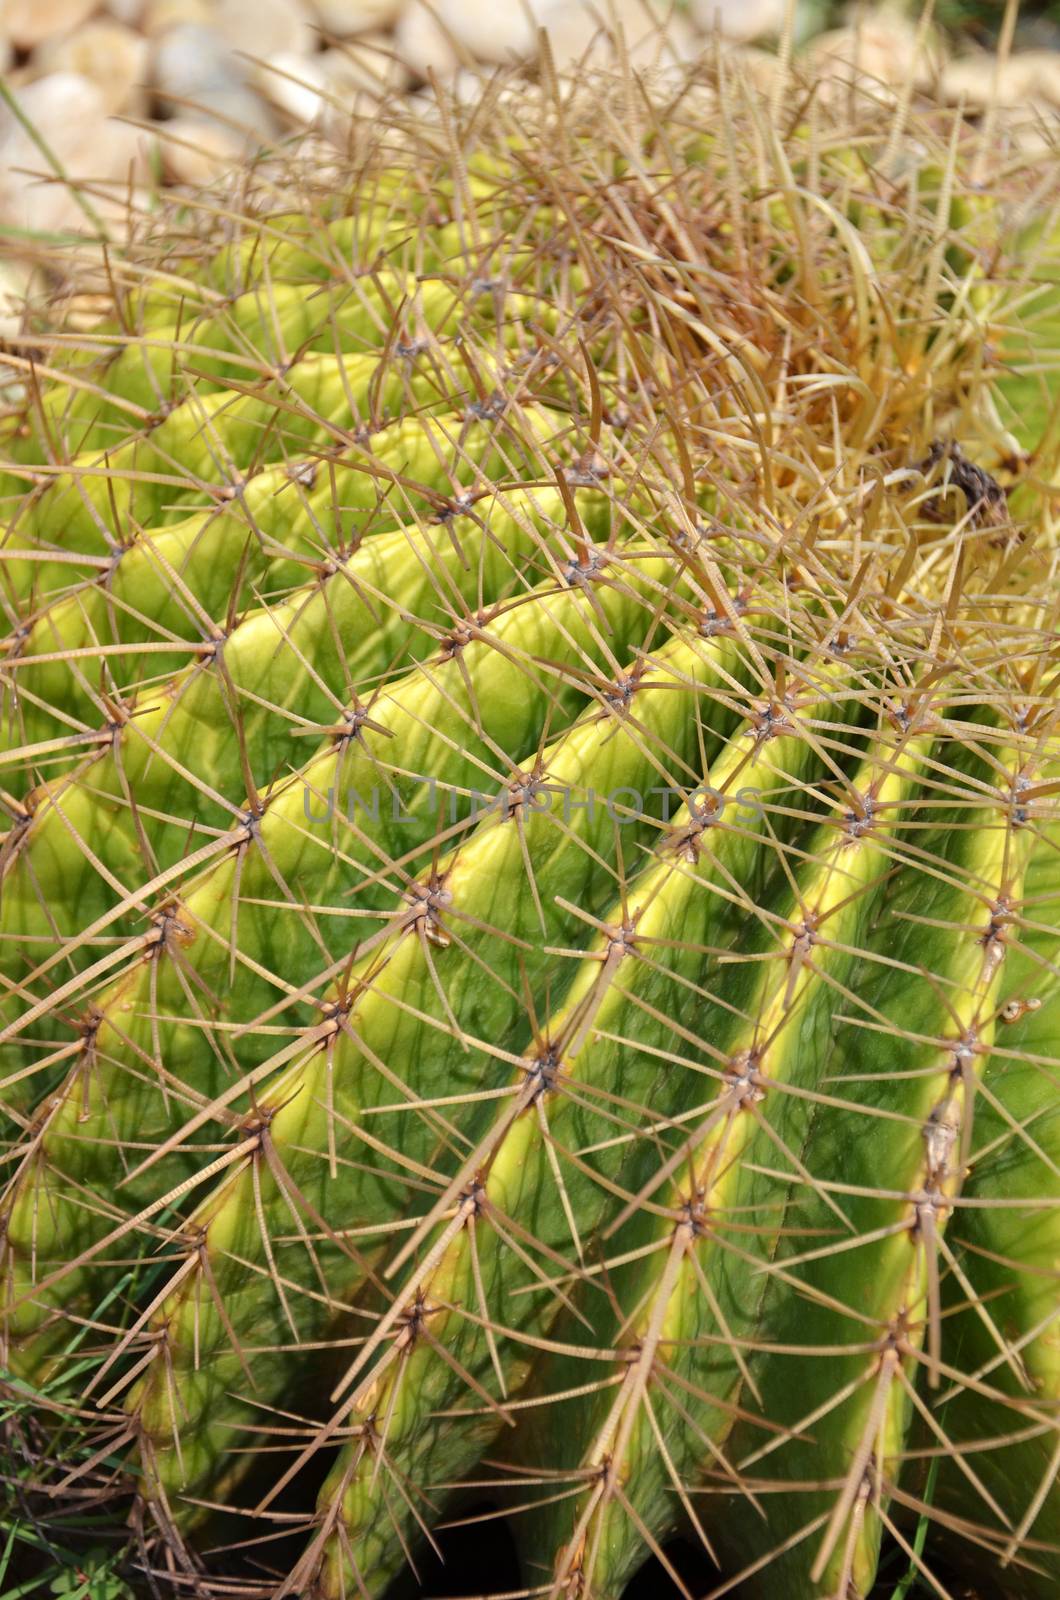 Cactus is a plant that needs very little water